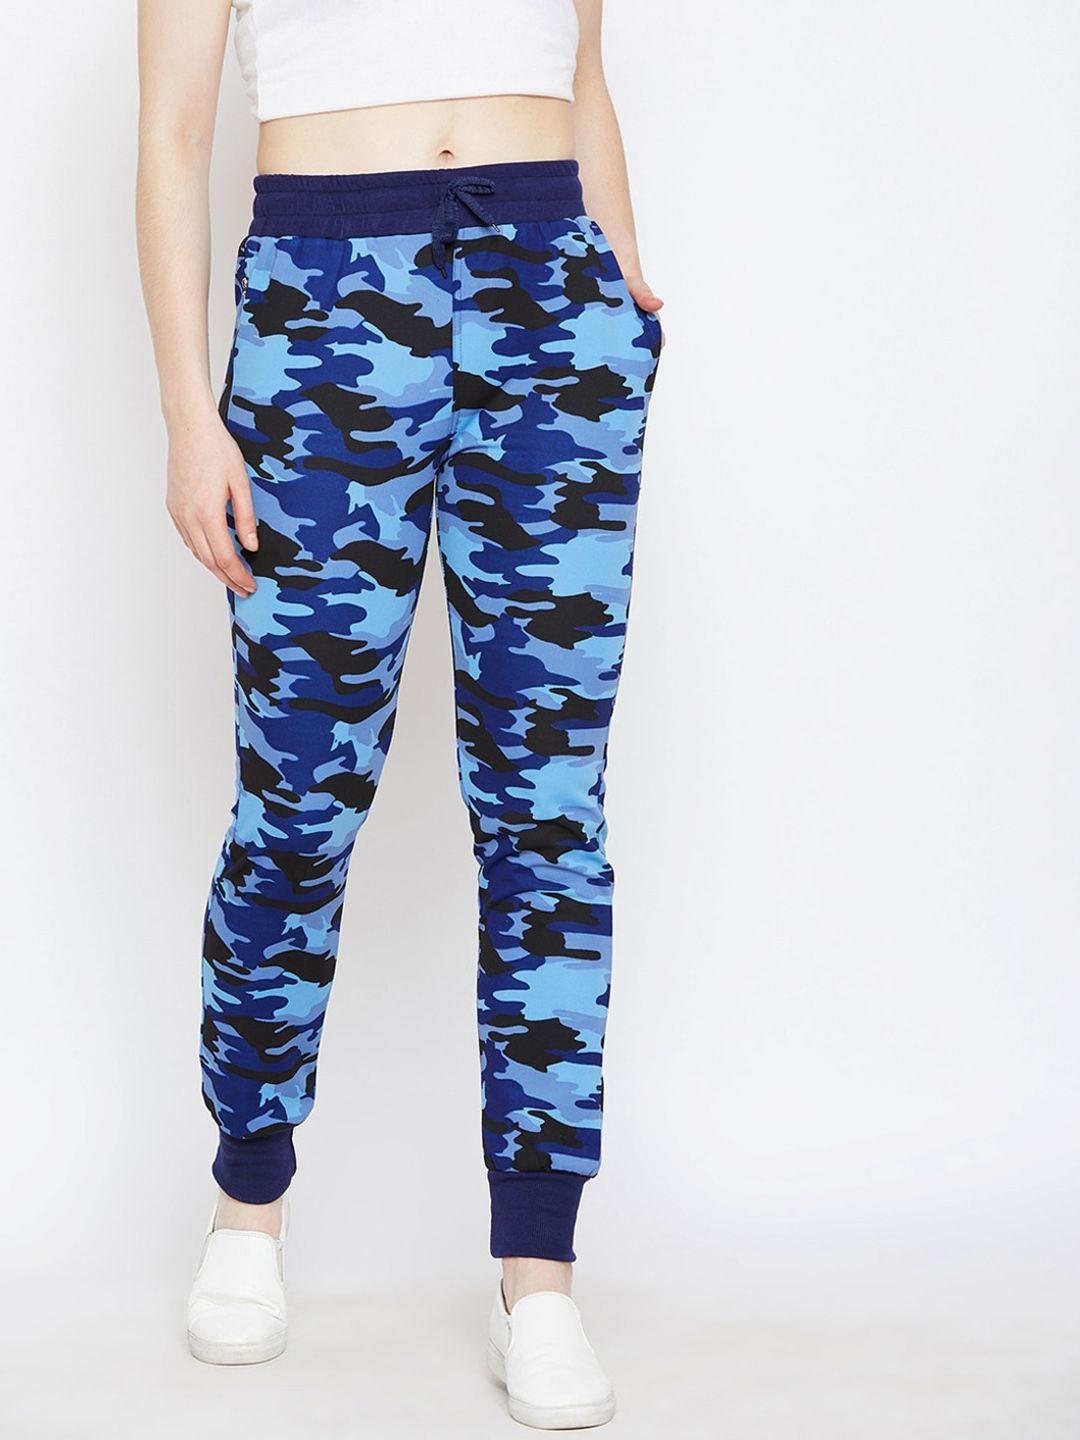 crease-&-clips-women-blue-&-black-camouflage-printed-slim-fit-joggers